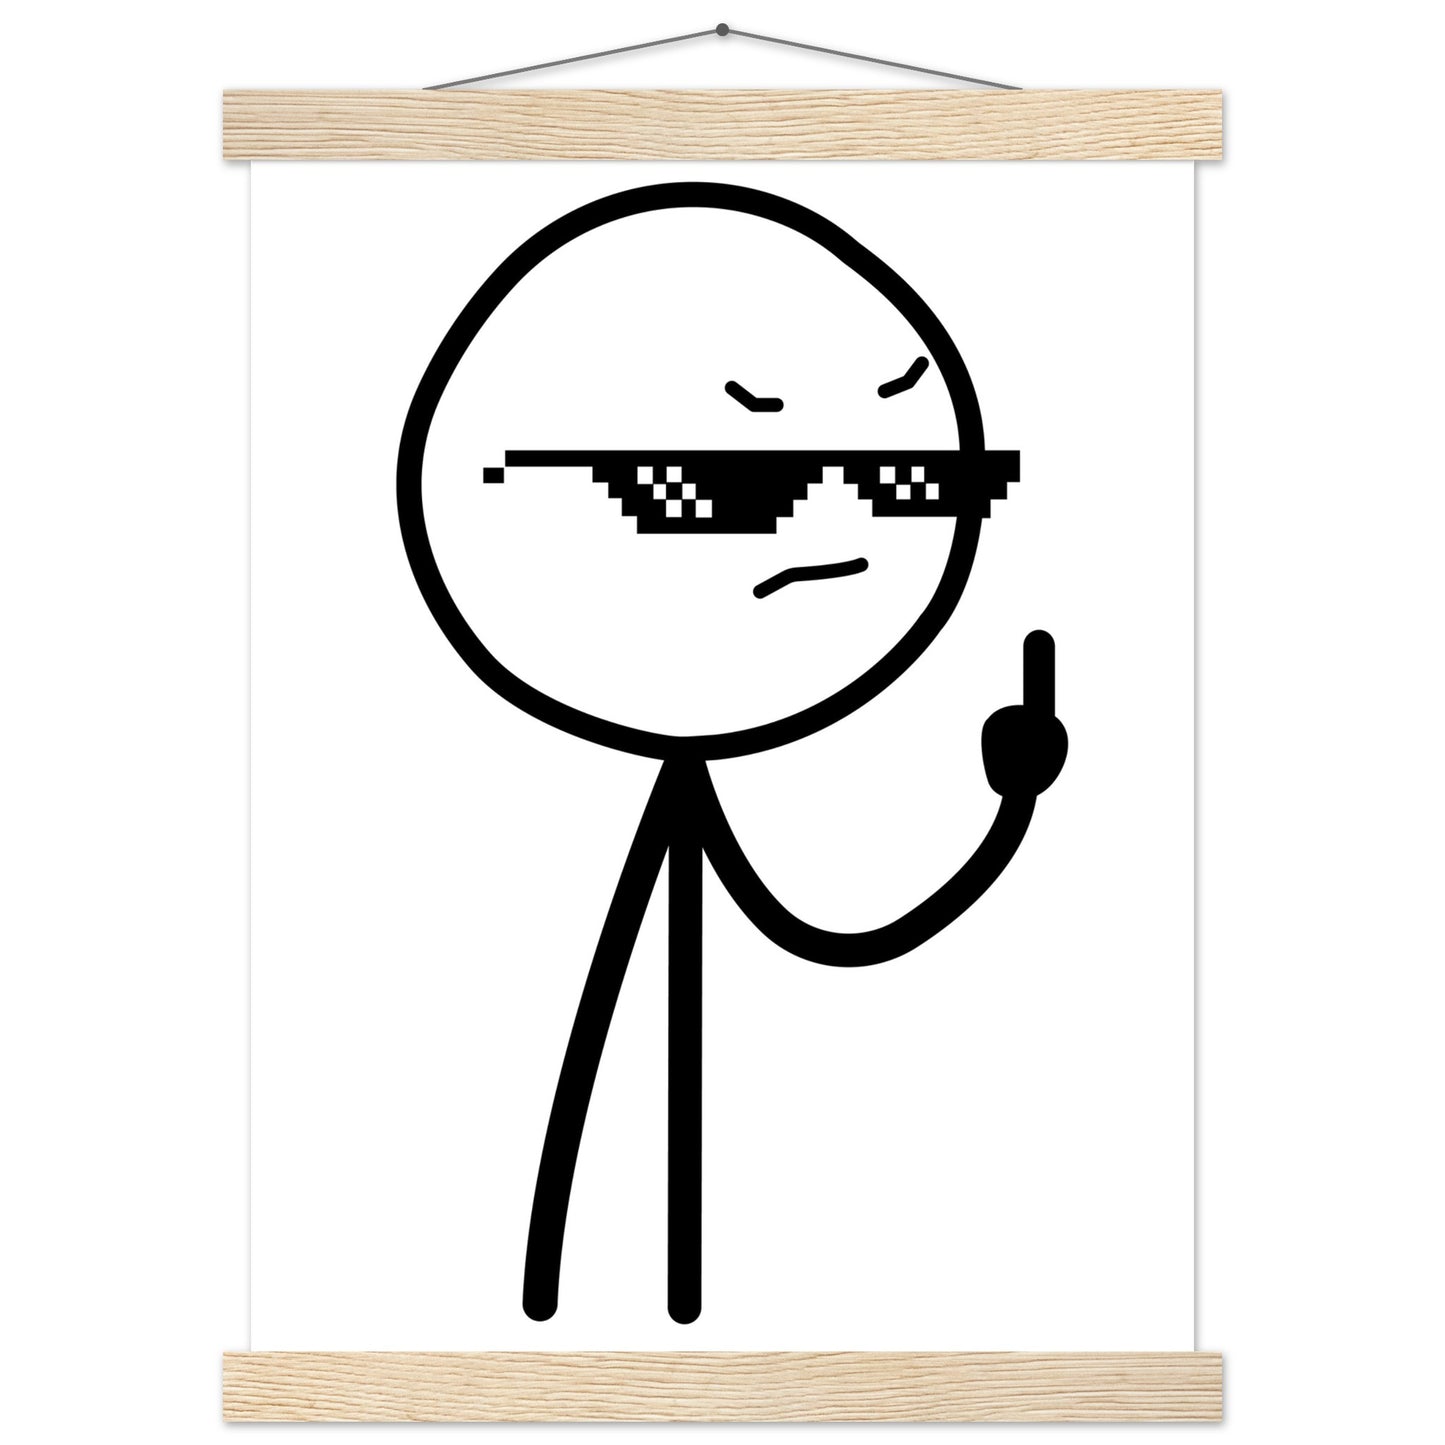 Funny Posters - Middlefinger Thug Artwork Drawing - Premium Matte Poster Paper with Hanger 